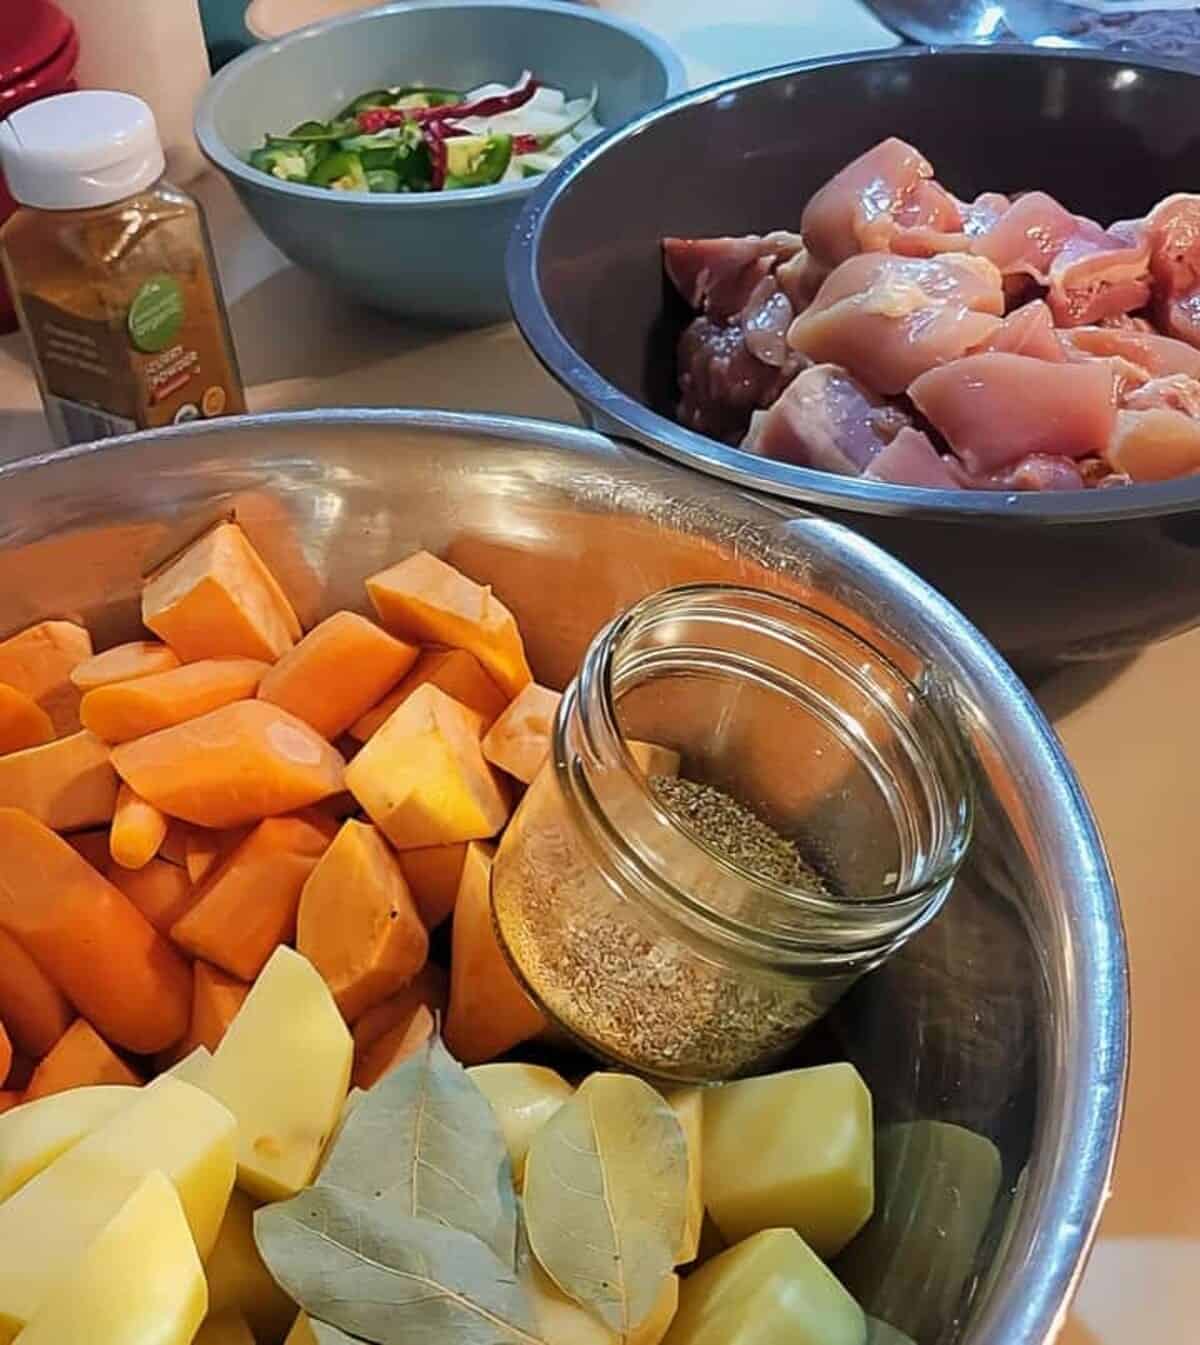 chopped and peeled sweet potatoes and yukon potatoes, bay leaves, dry coriander, jar of curry powder, diced raw chicken, sliced jalapeno, diced yellow onion, and dried red chilies